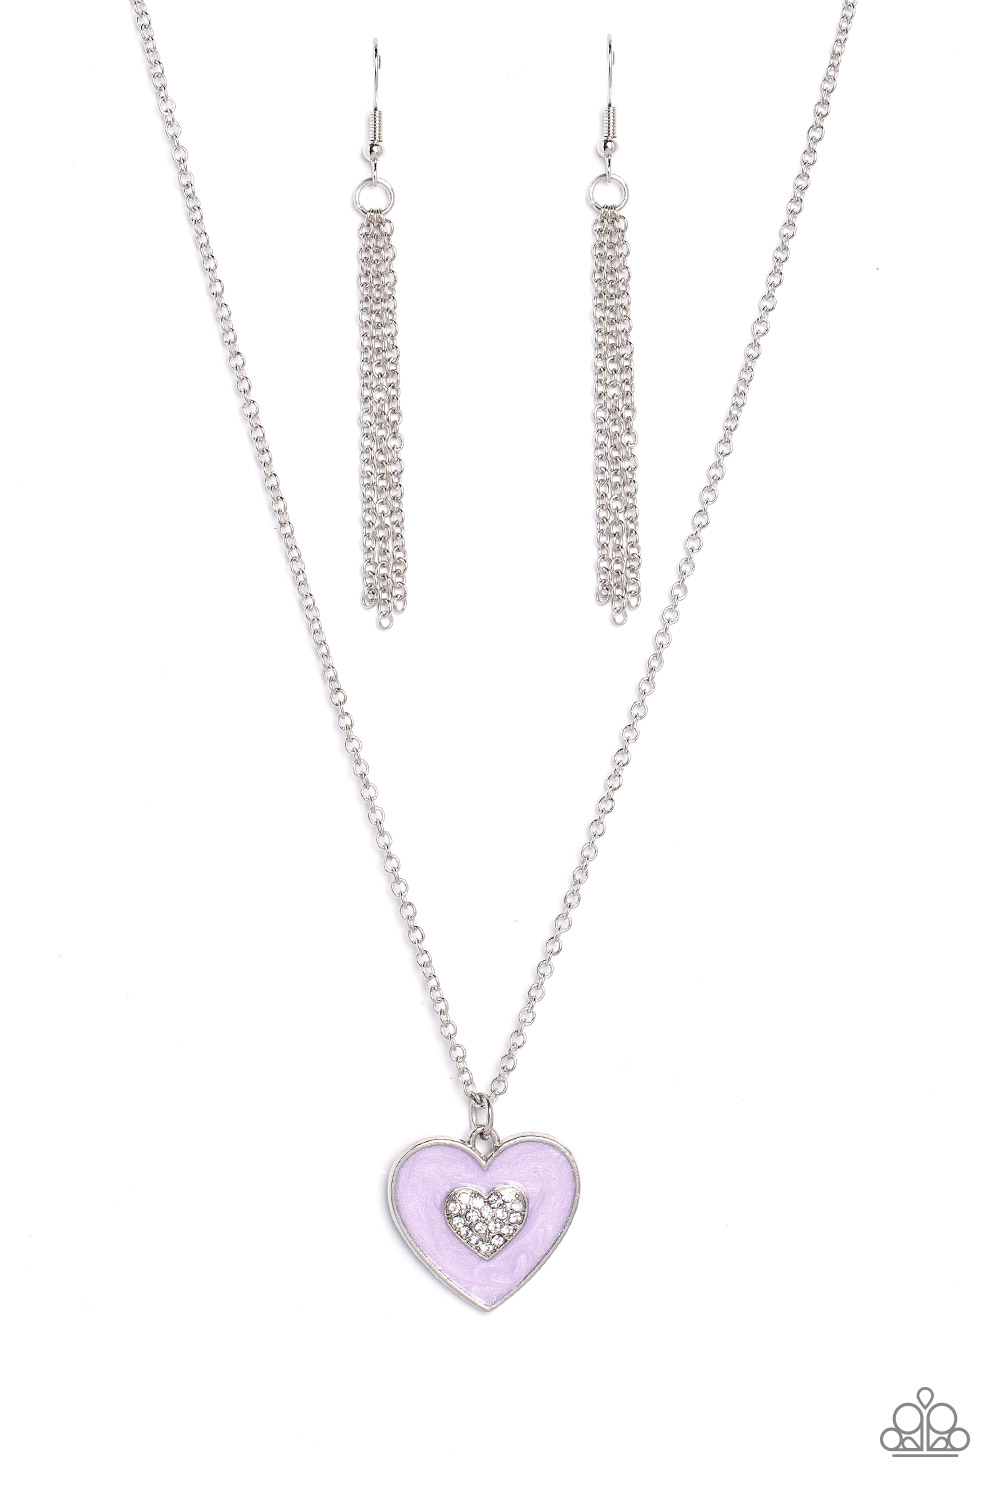 Necklace - So This Is Love - Purple